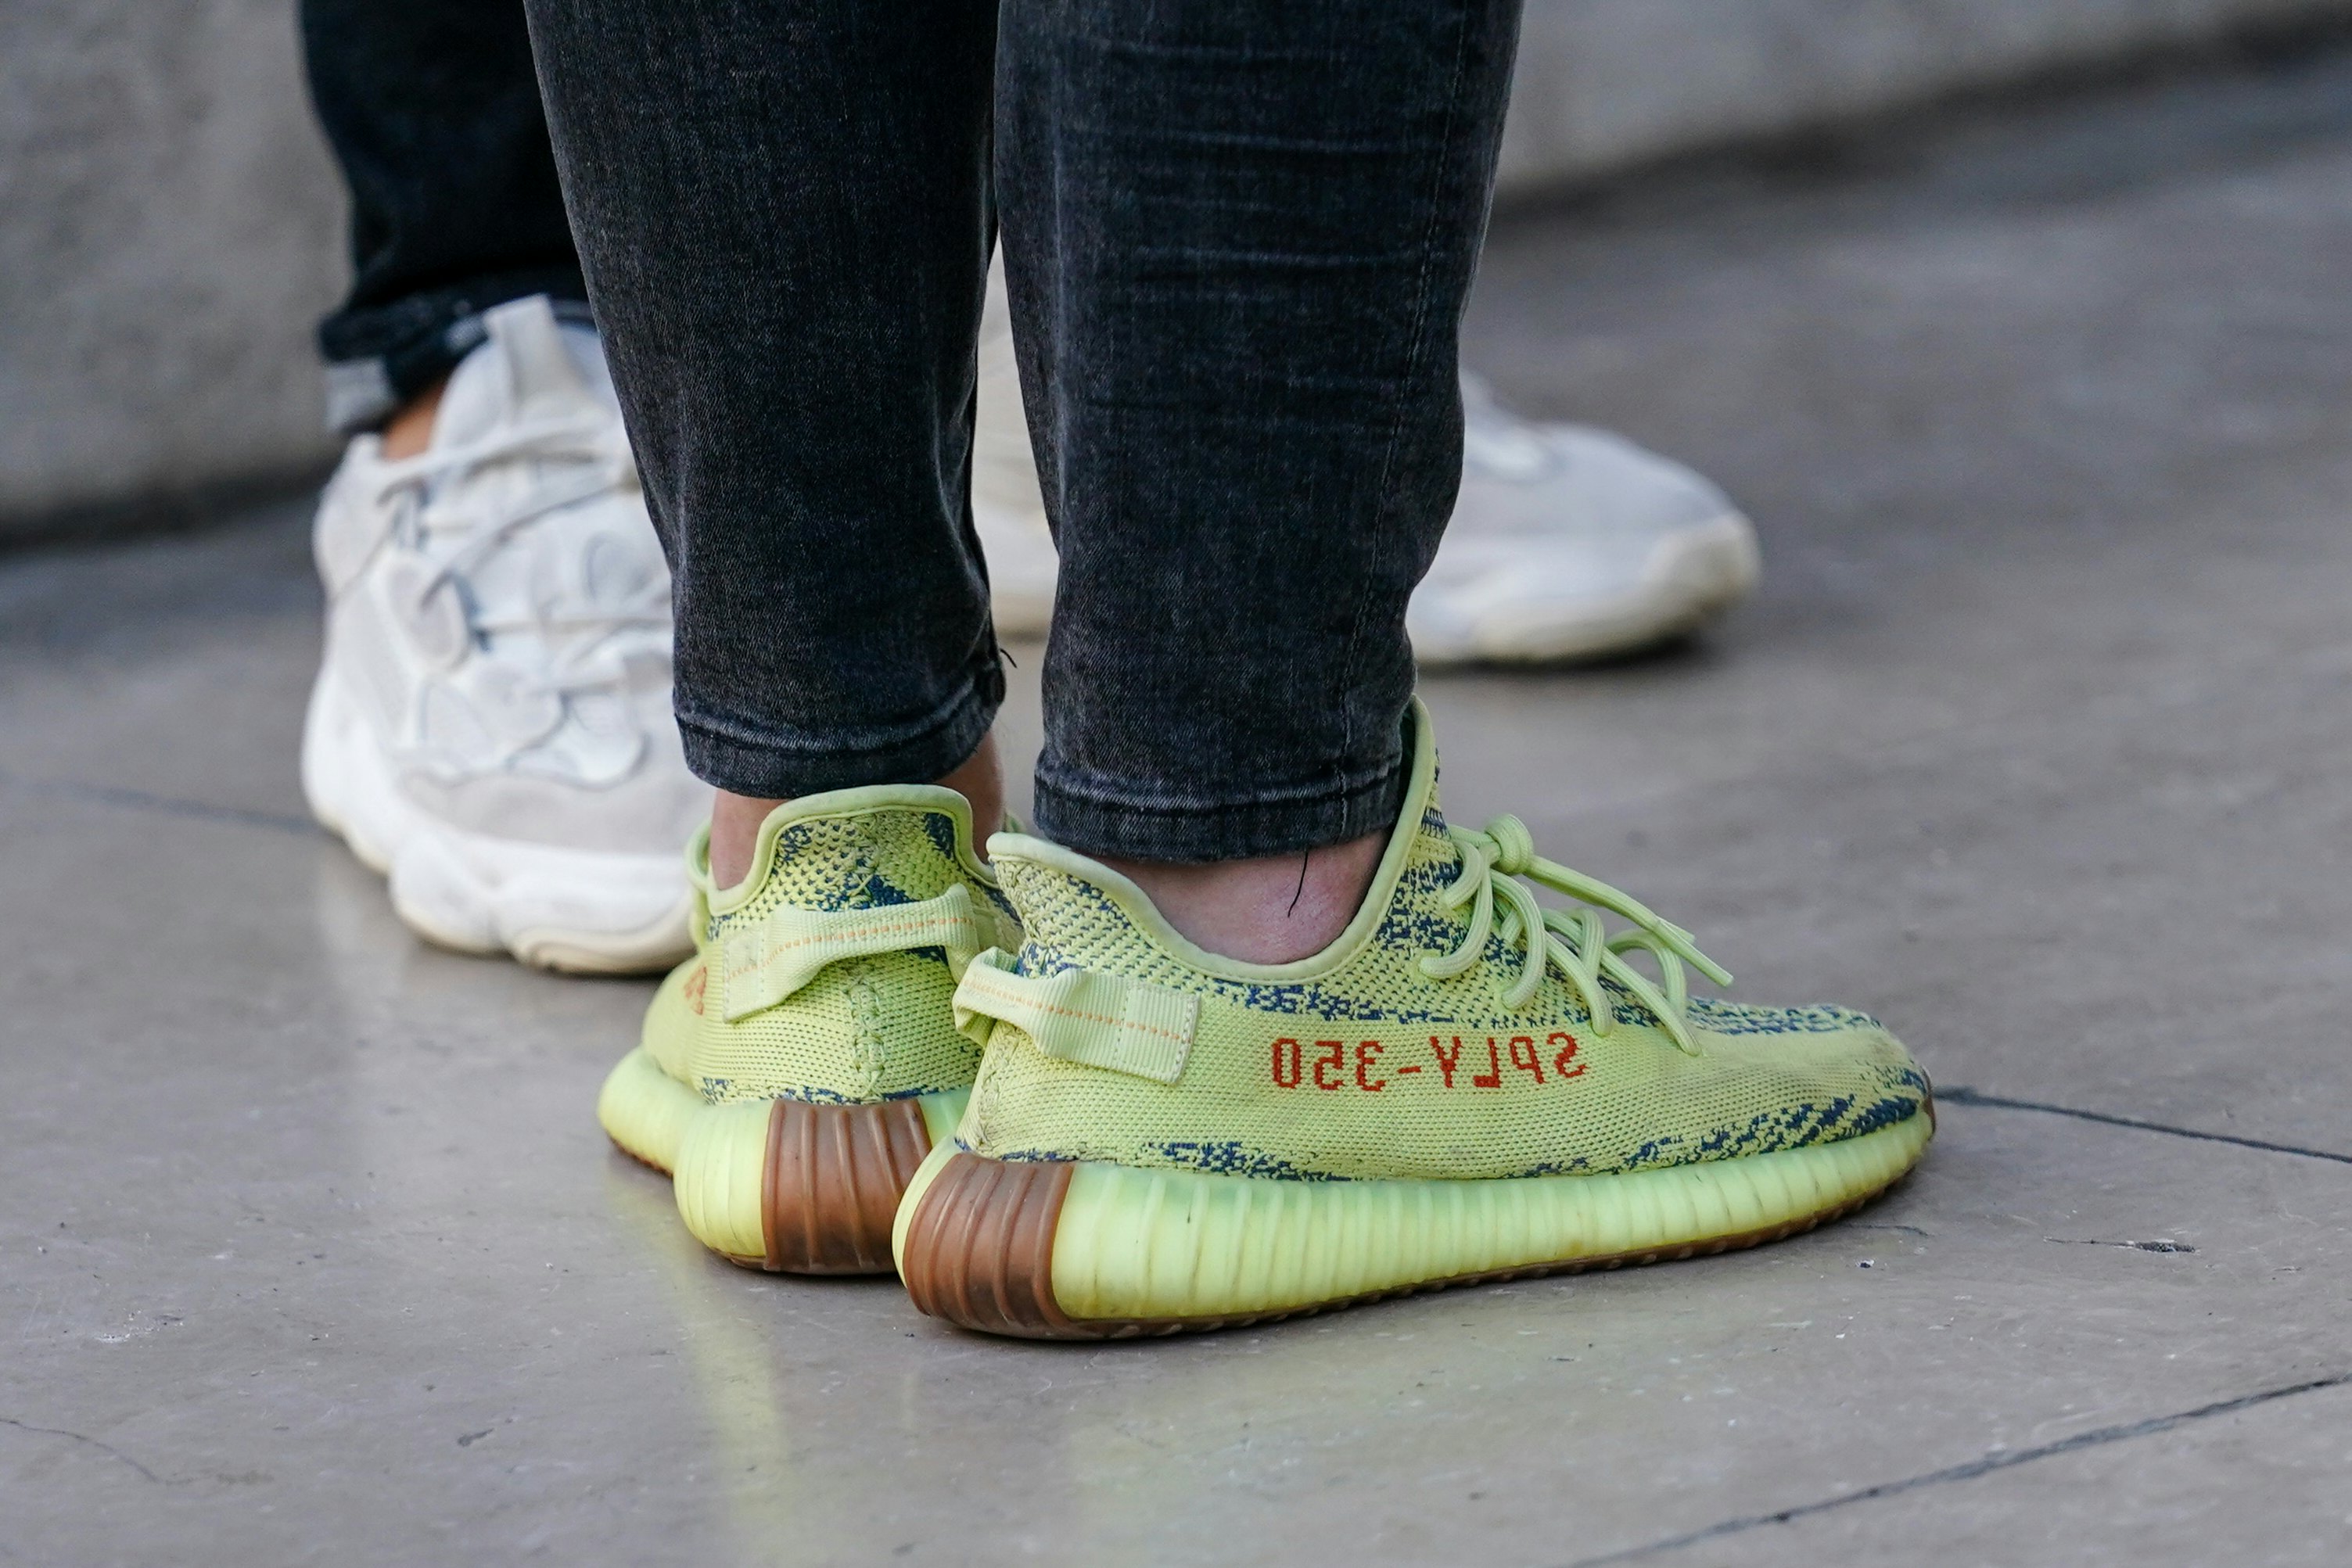 lusted-after Yeezy 350 V2 lost its hype